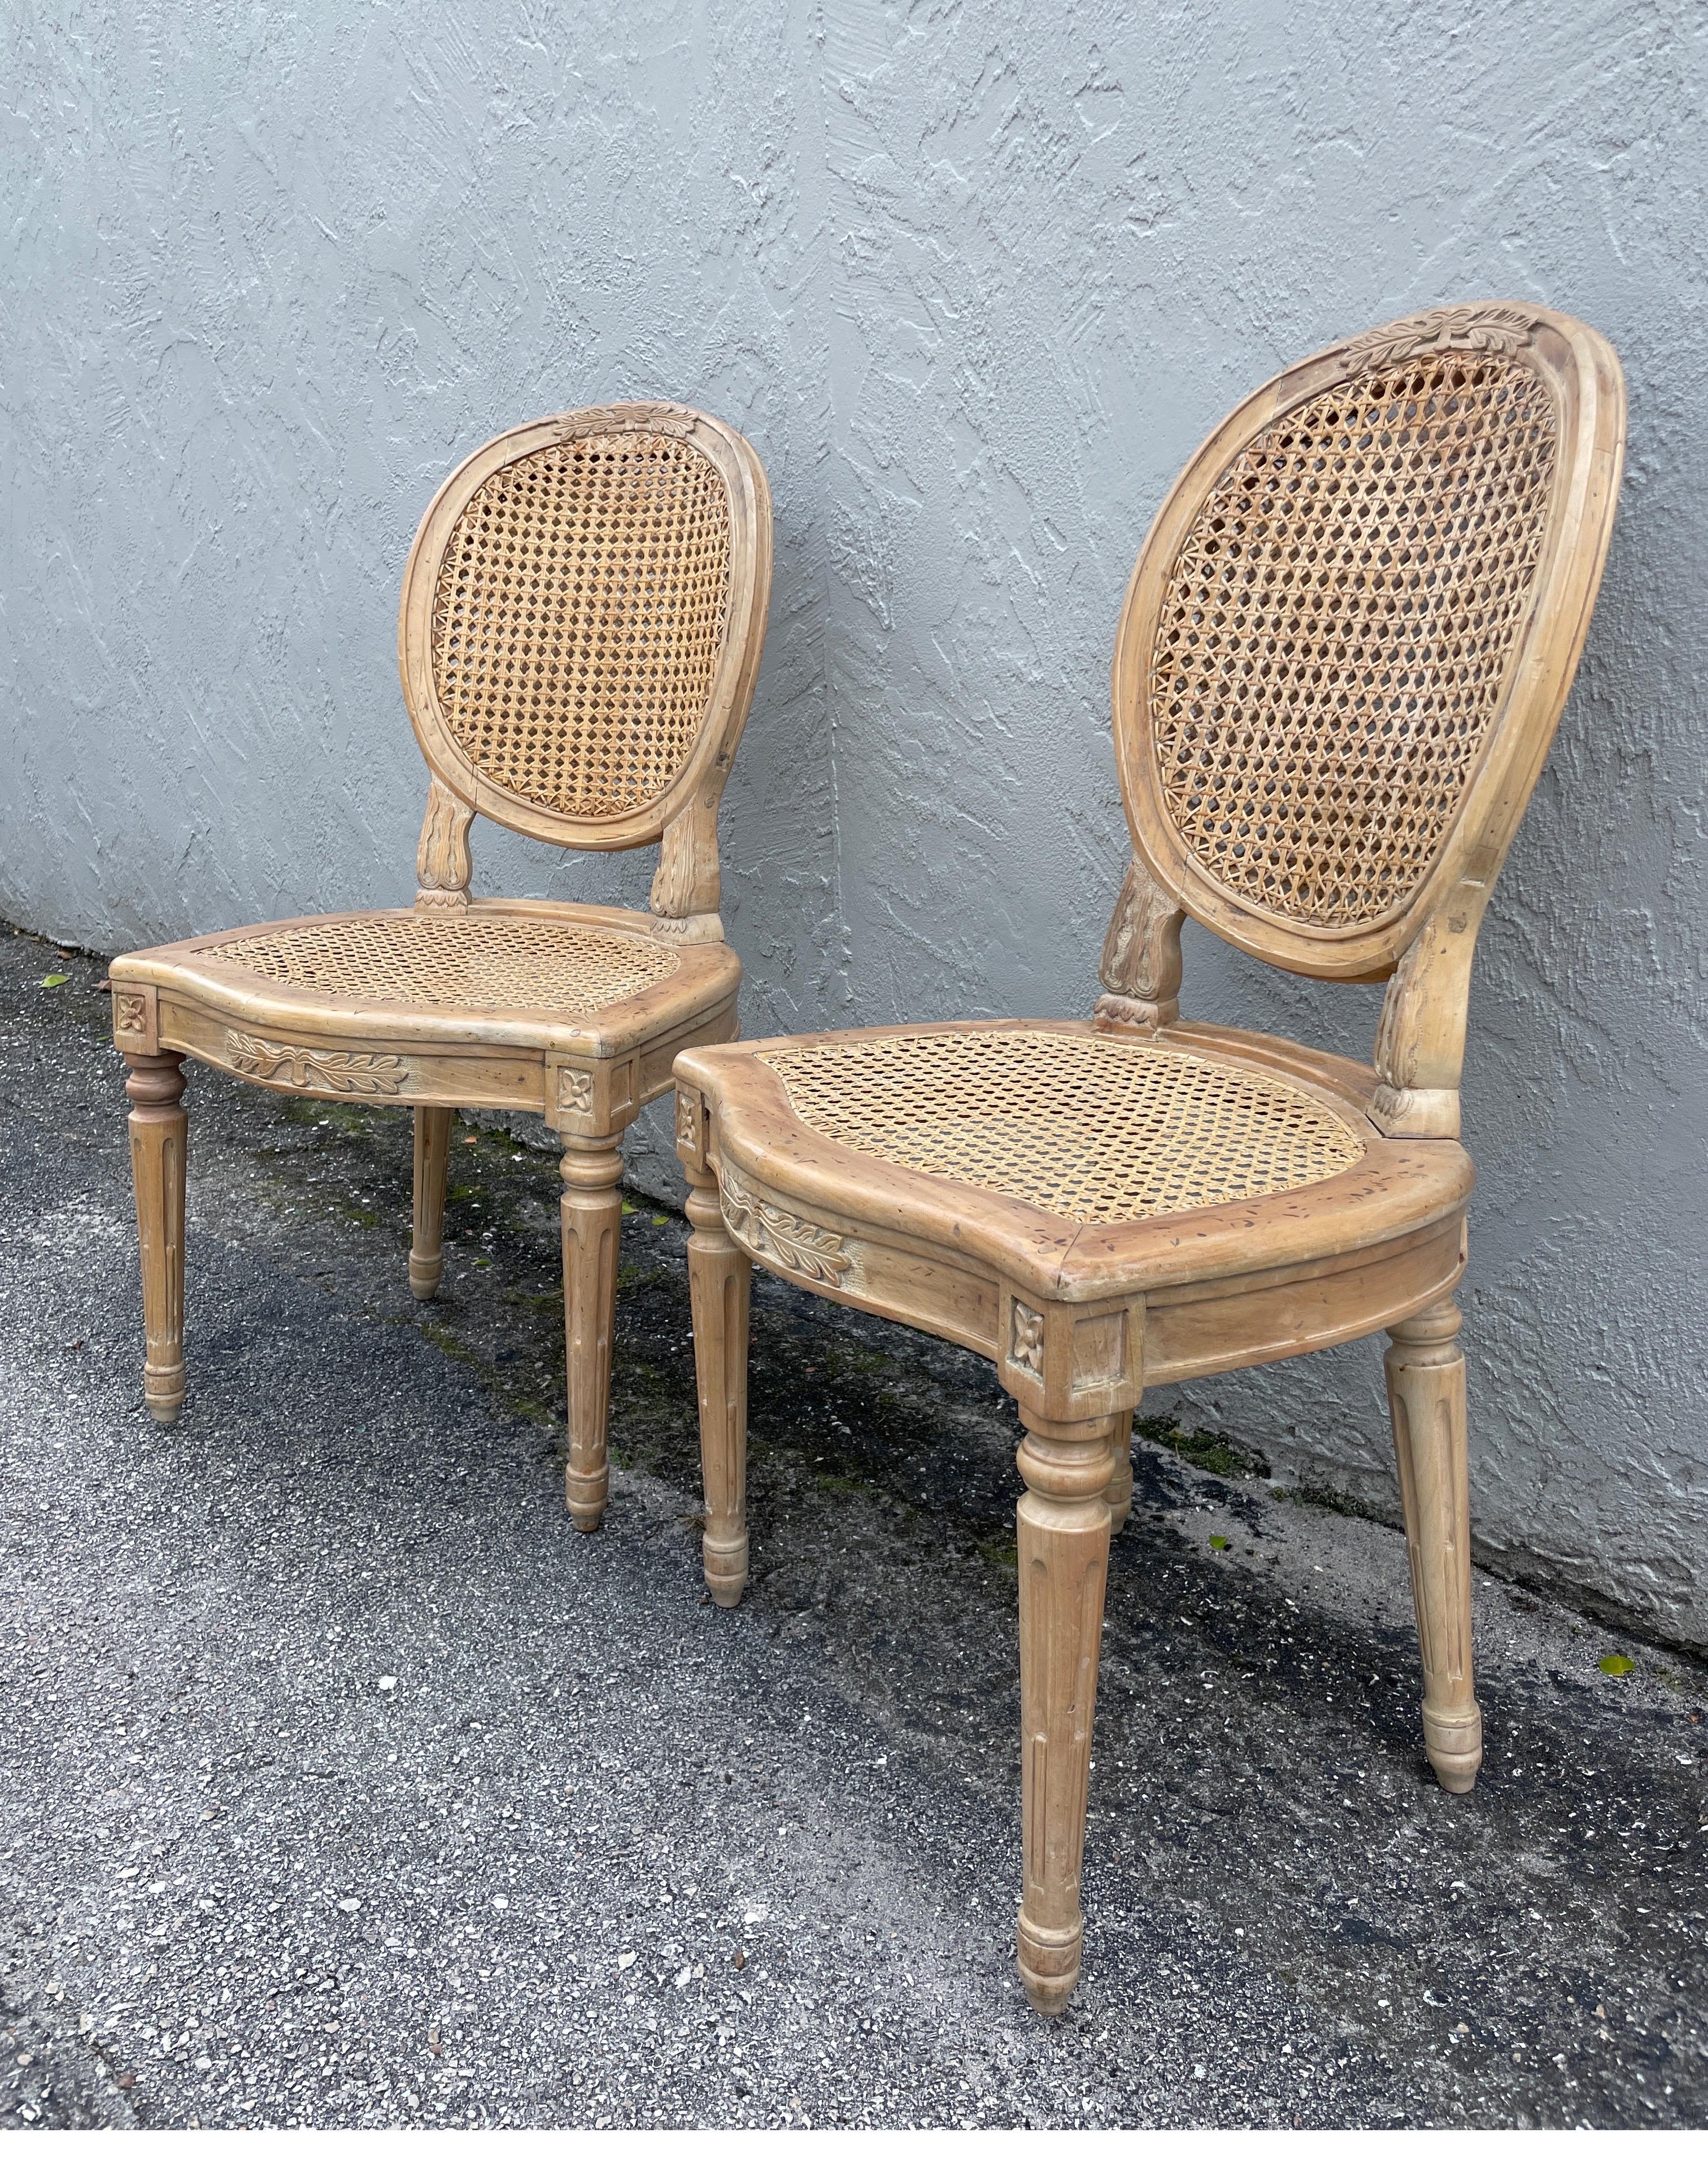 Vintage pair of Louis XVI style side chairs. The finish is a light natural color with a slight touch of white. The seat is caned & the oval back is double hand caned. Very well constructed by Italian artisans. Perfect chairs for your entrance hall,